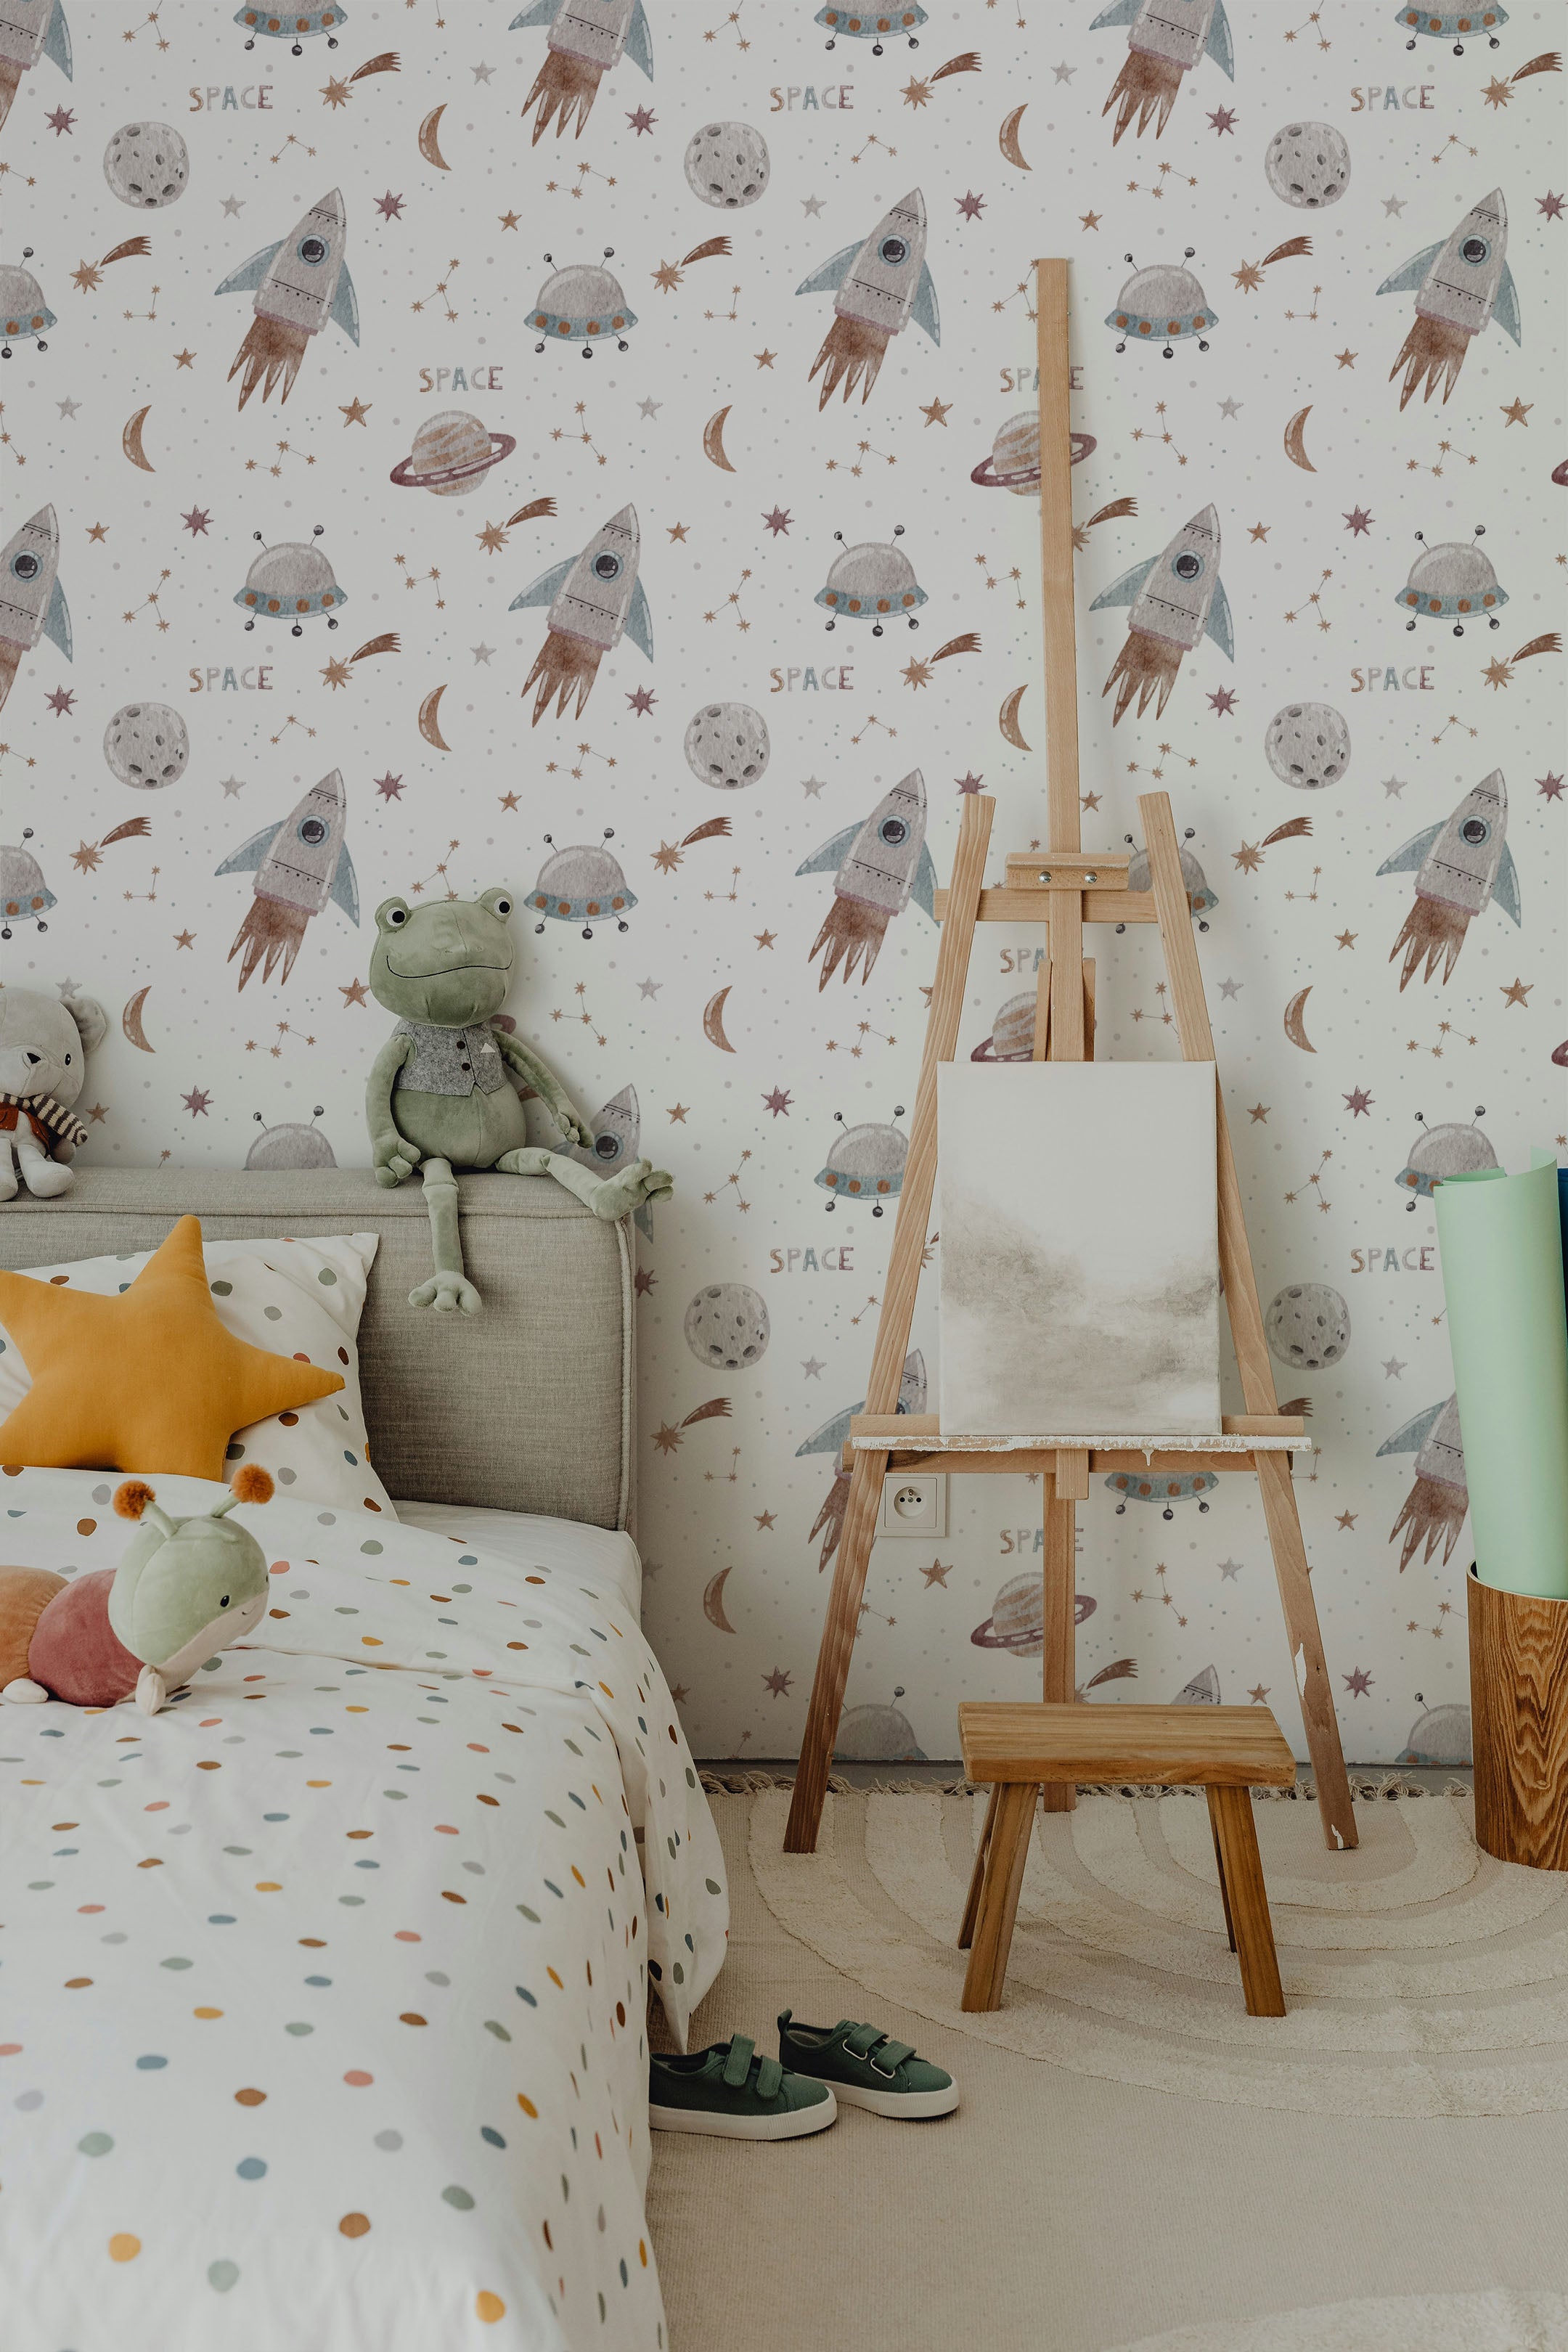 A cozy child's bedroom adorned with Space Craze Wallpaper, featuring cute space motifs like rockets, satellites, and planets in a gentle color palette. The room is styled with a bed, colorful pillows, and a wooden easel, creating an inviting and imaginative play area.